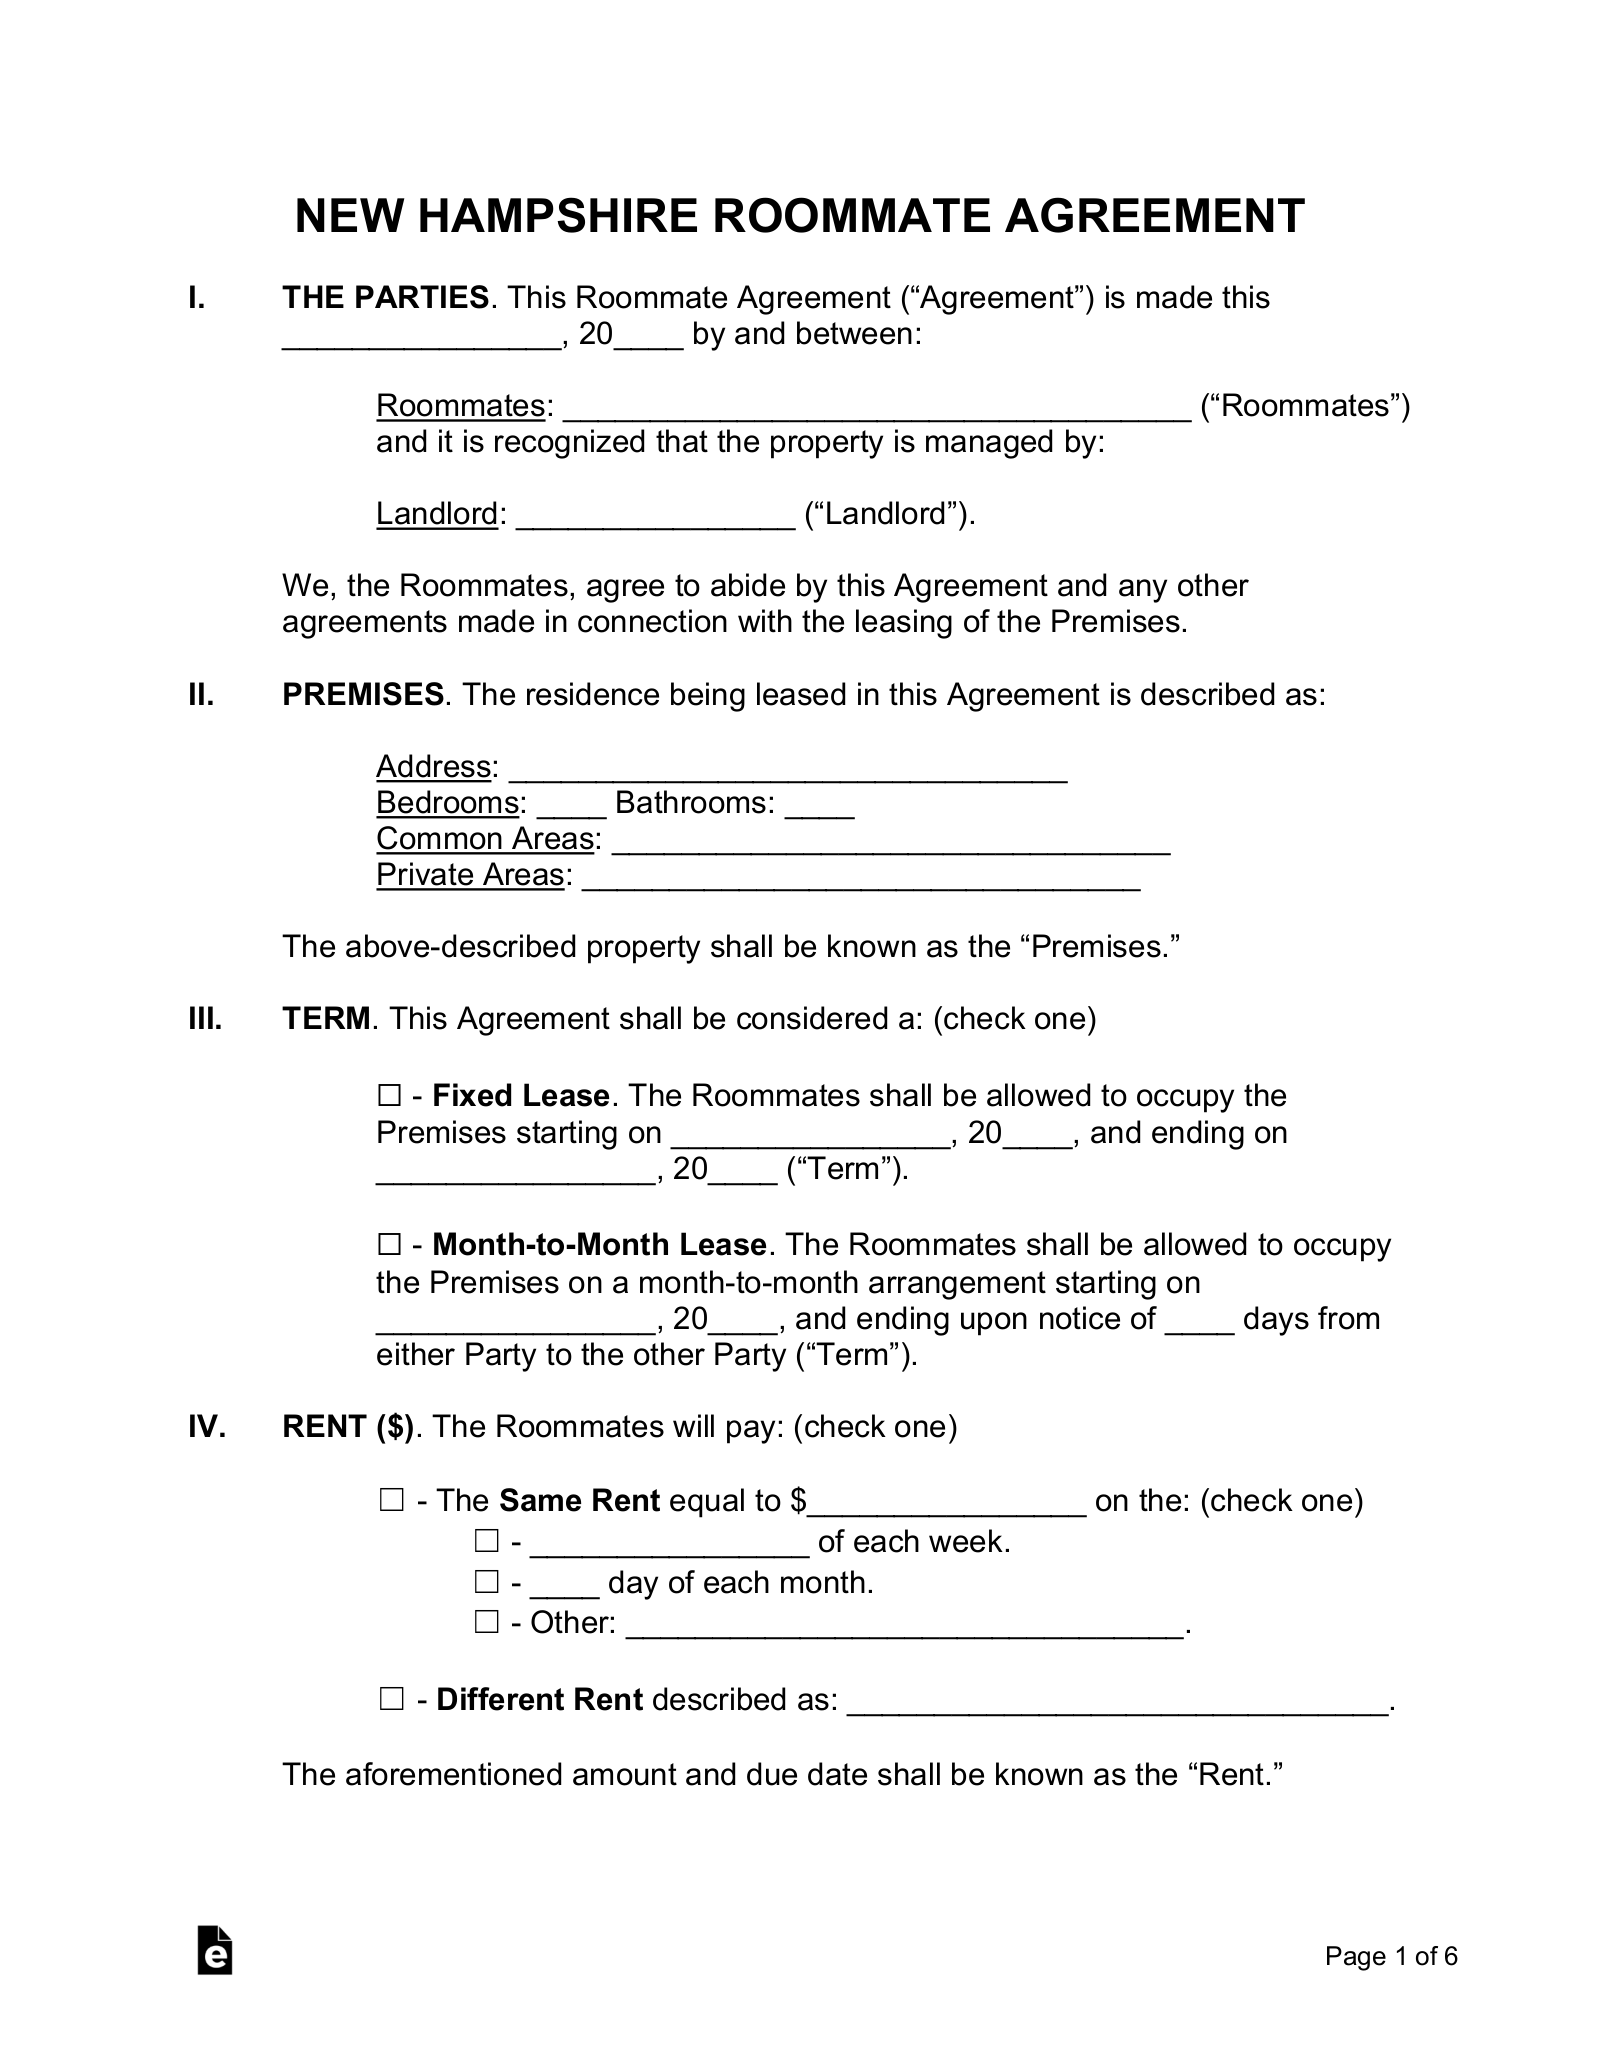 New Hampshire Roommate Agreement